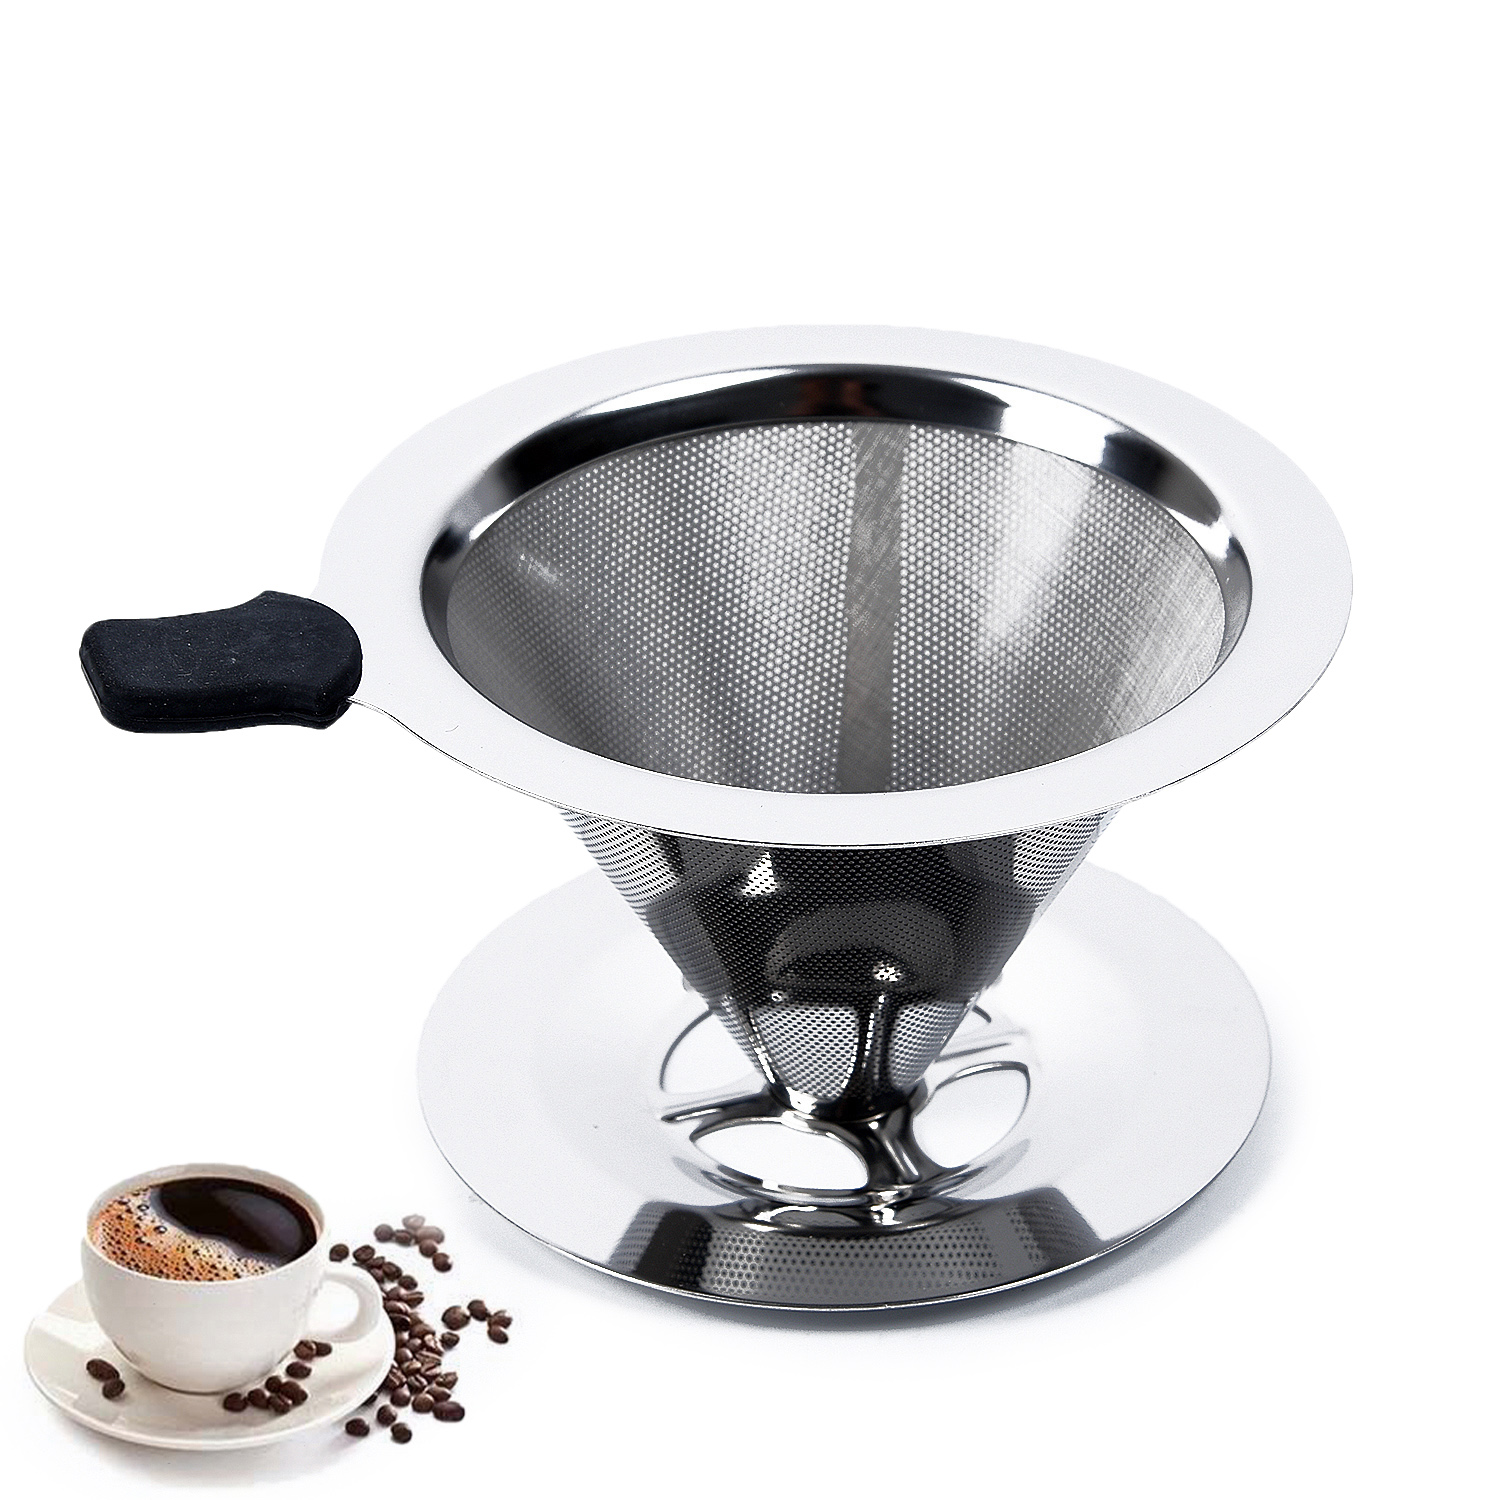 

Coffee Permanent Filter Coffee Filter Permanent Filter Filter Metal Strainer Stainless Steel